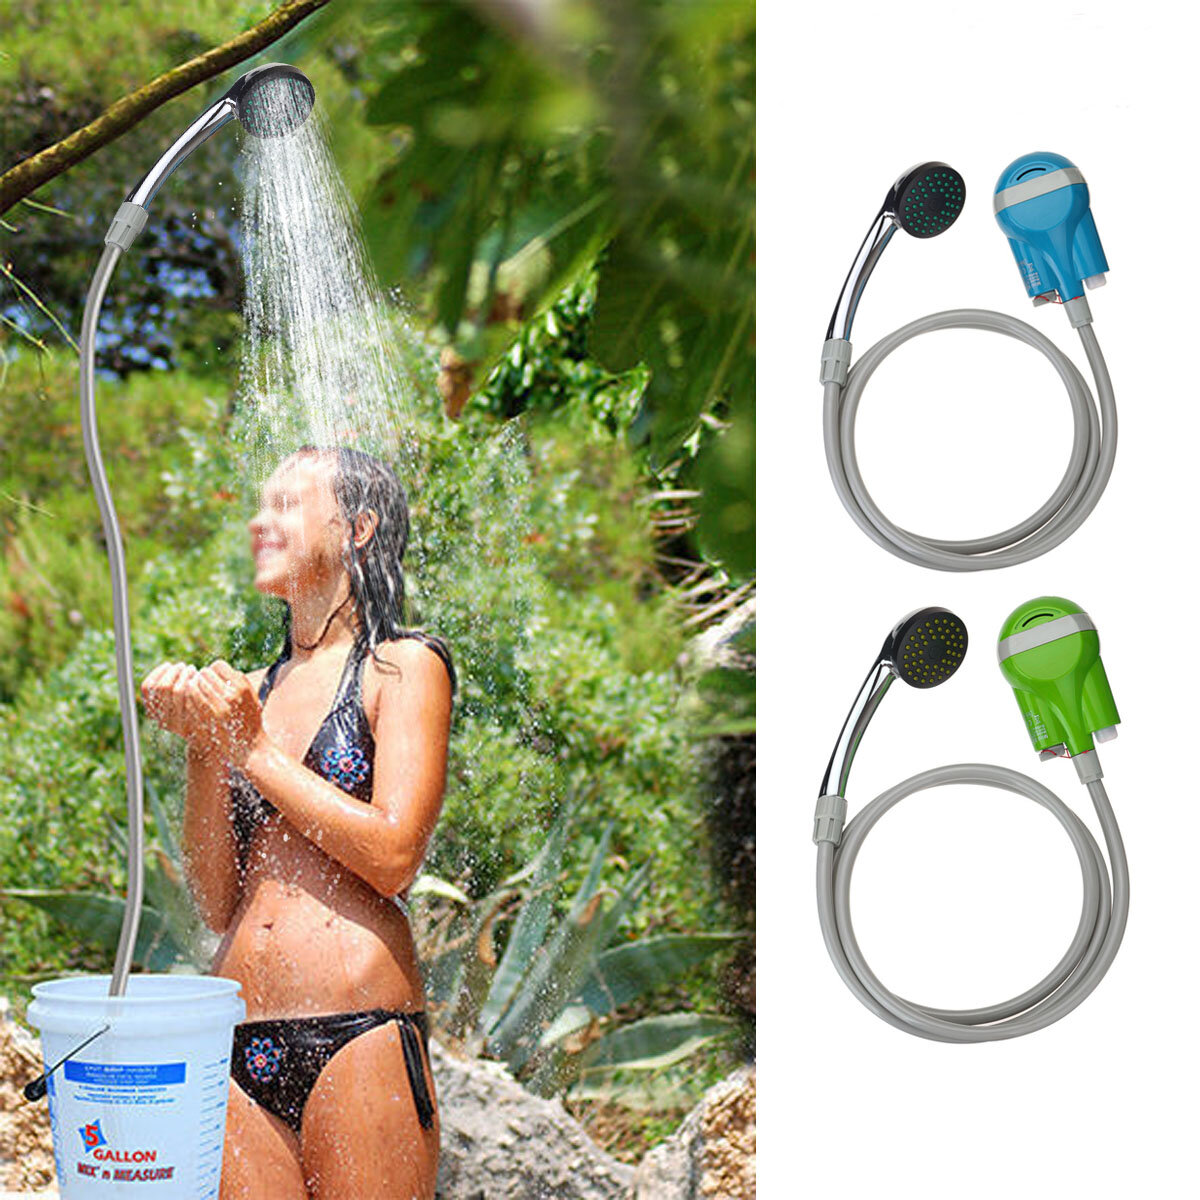 IPRee® Portable USB Shower Water Pump Rechargeable Nozzle Handheld Shower Faucet Camp Travel Outdoor Kit